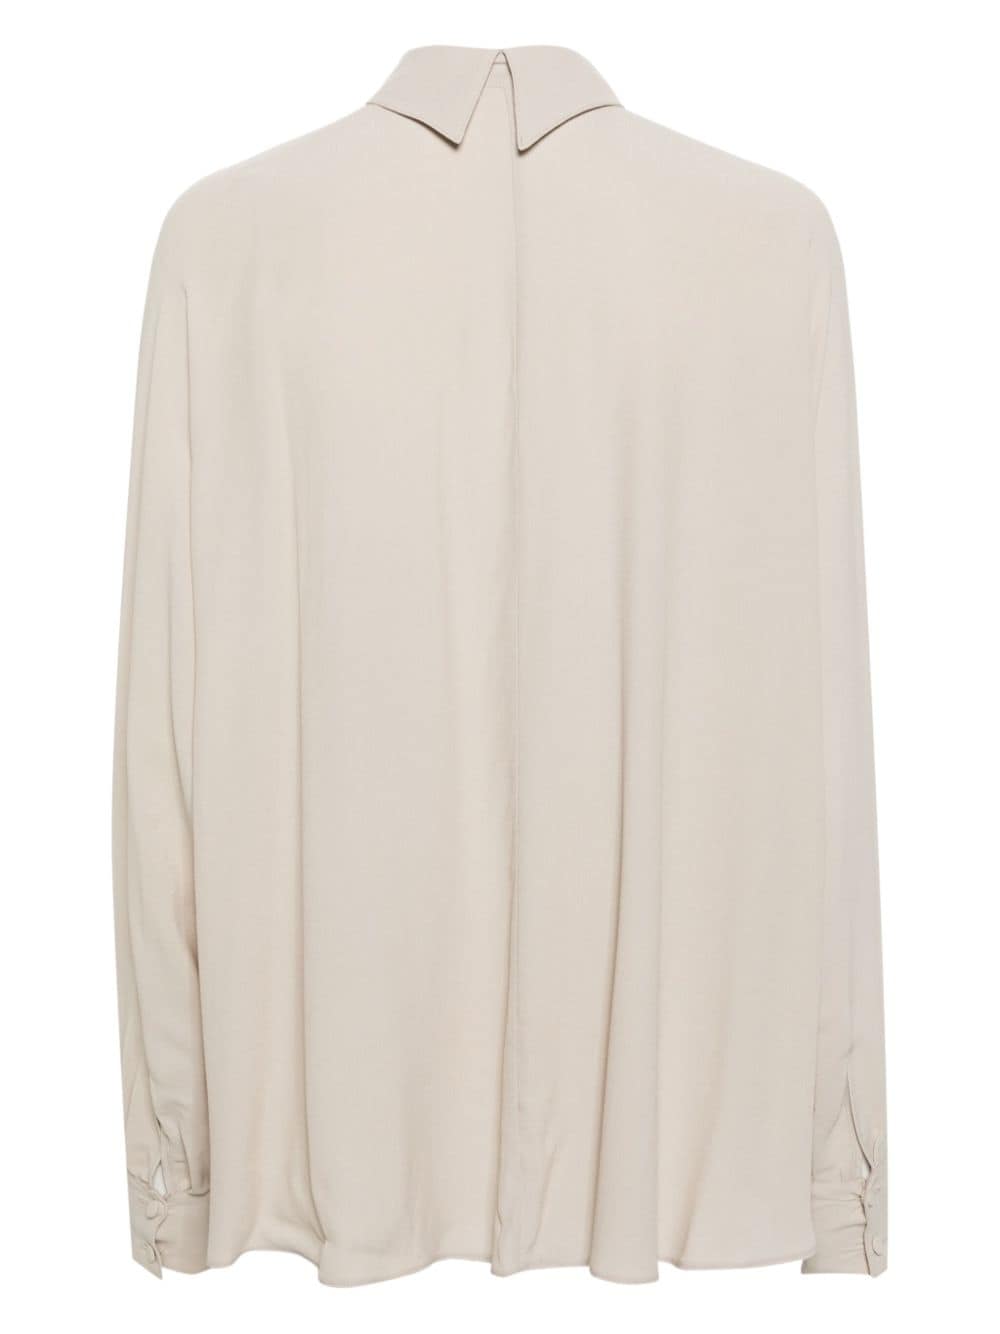 STYLAND batwing-style crepe shirt - Beige